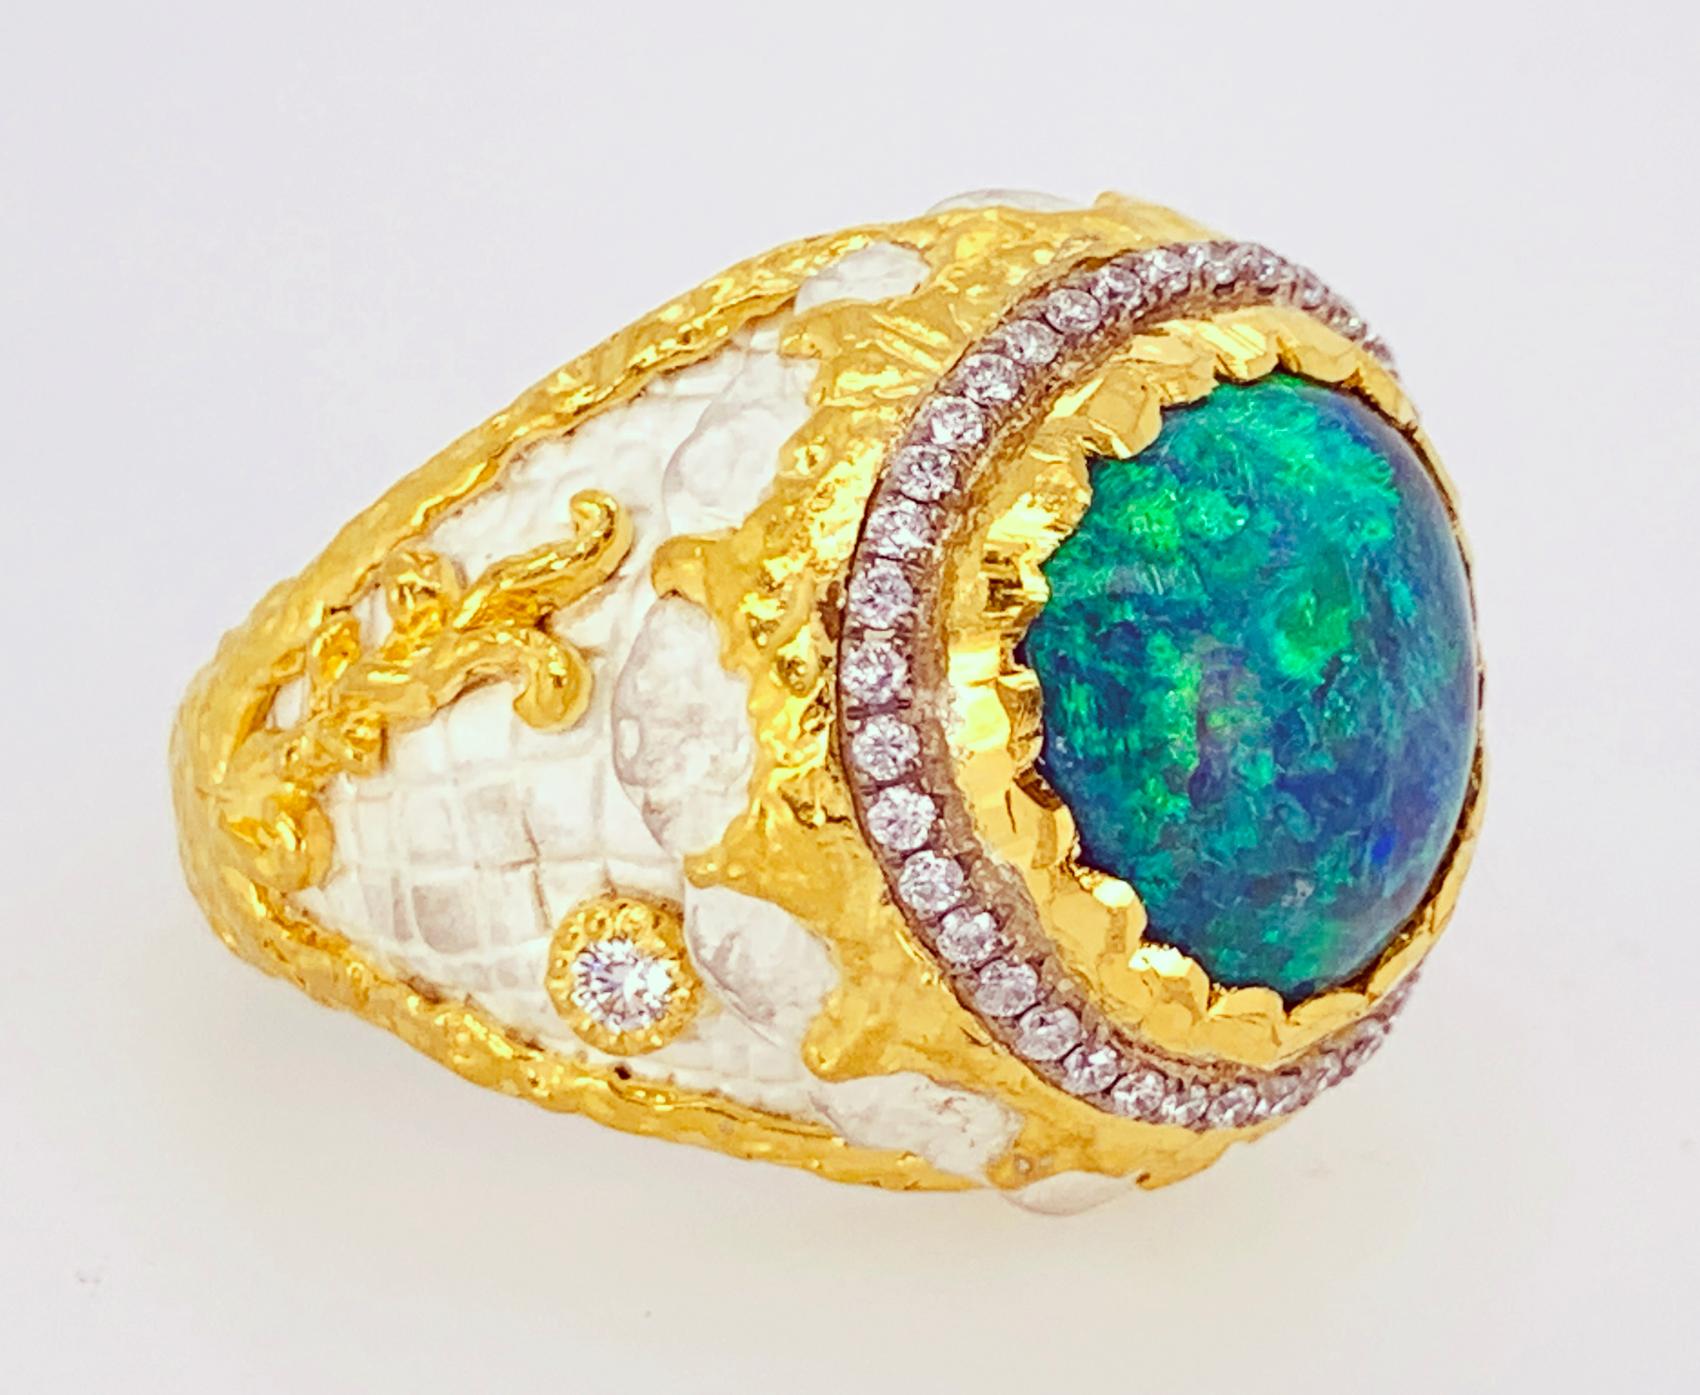 This ring was designed and made by well known designer Victor Velyan.  It features a single Black Opal weighing 5.13 carats is accented by 0.34 carats of fully faceted, round brilliant cut diamonds.  The body of cuff was hand formed in sterling